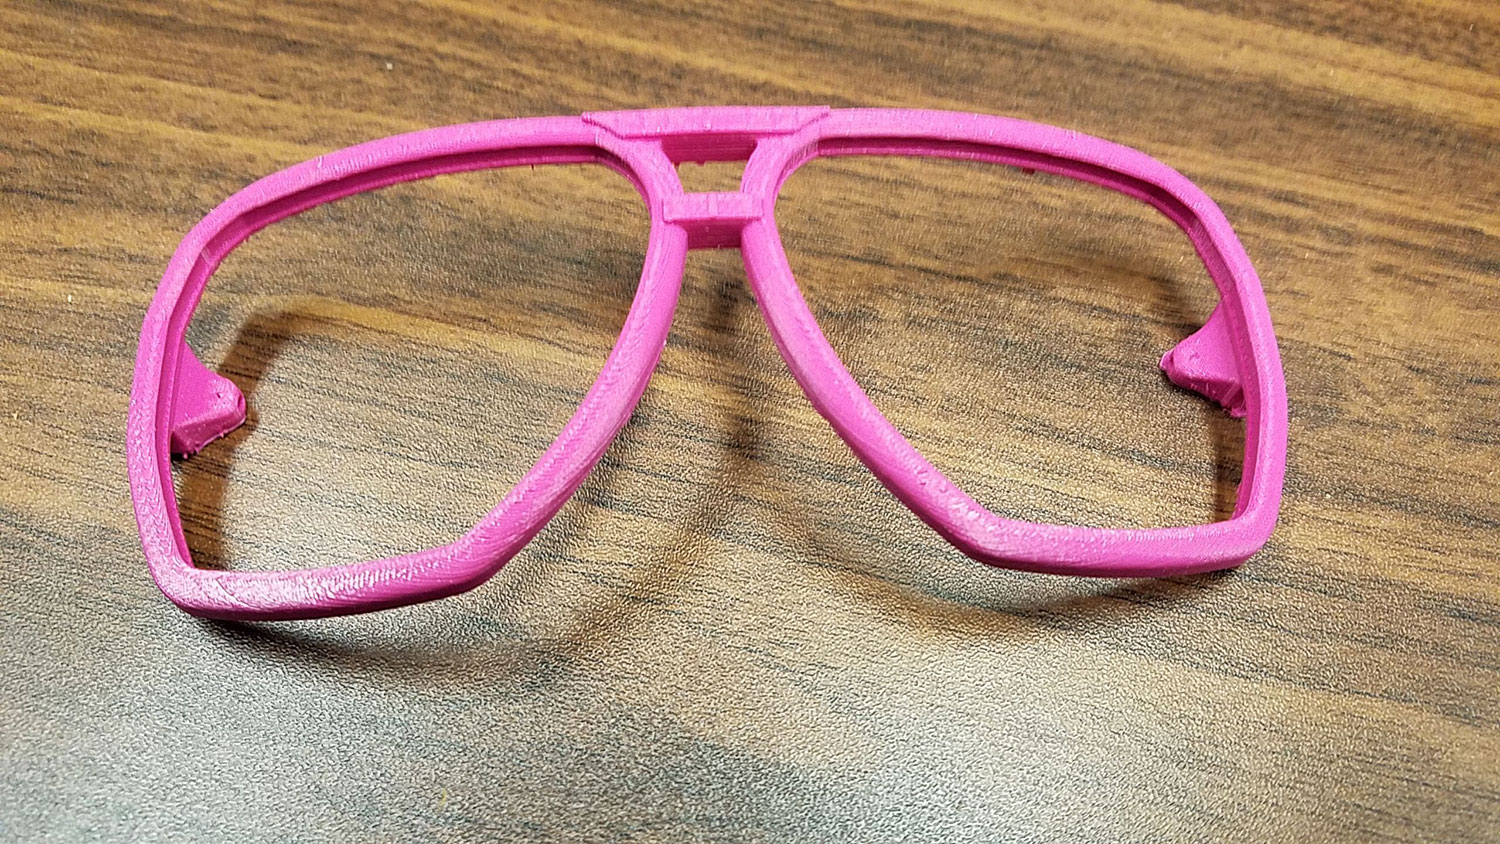 3d printed pink frame for sunglasses.